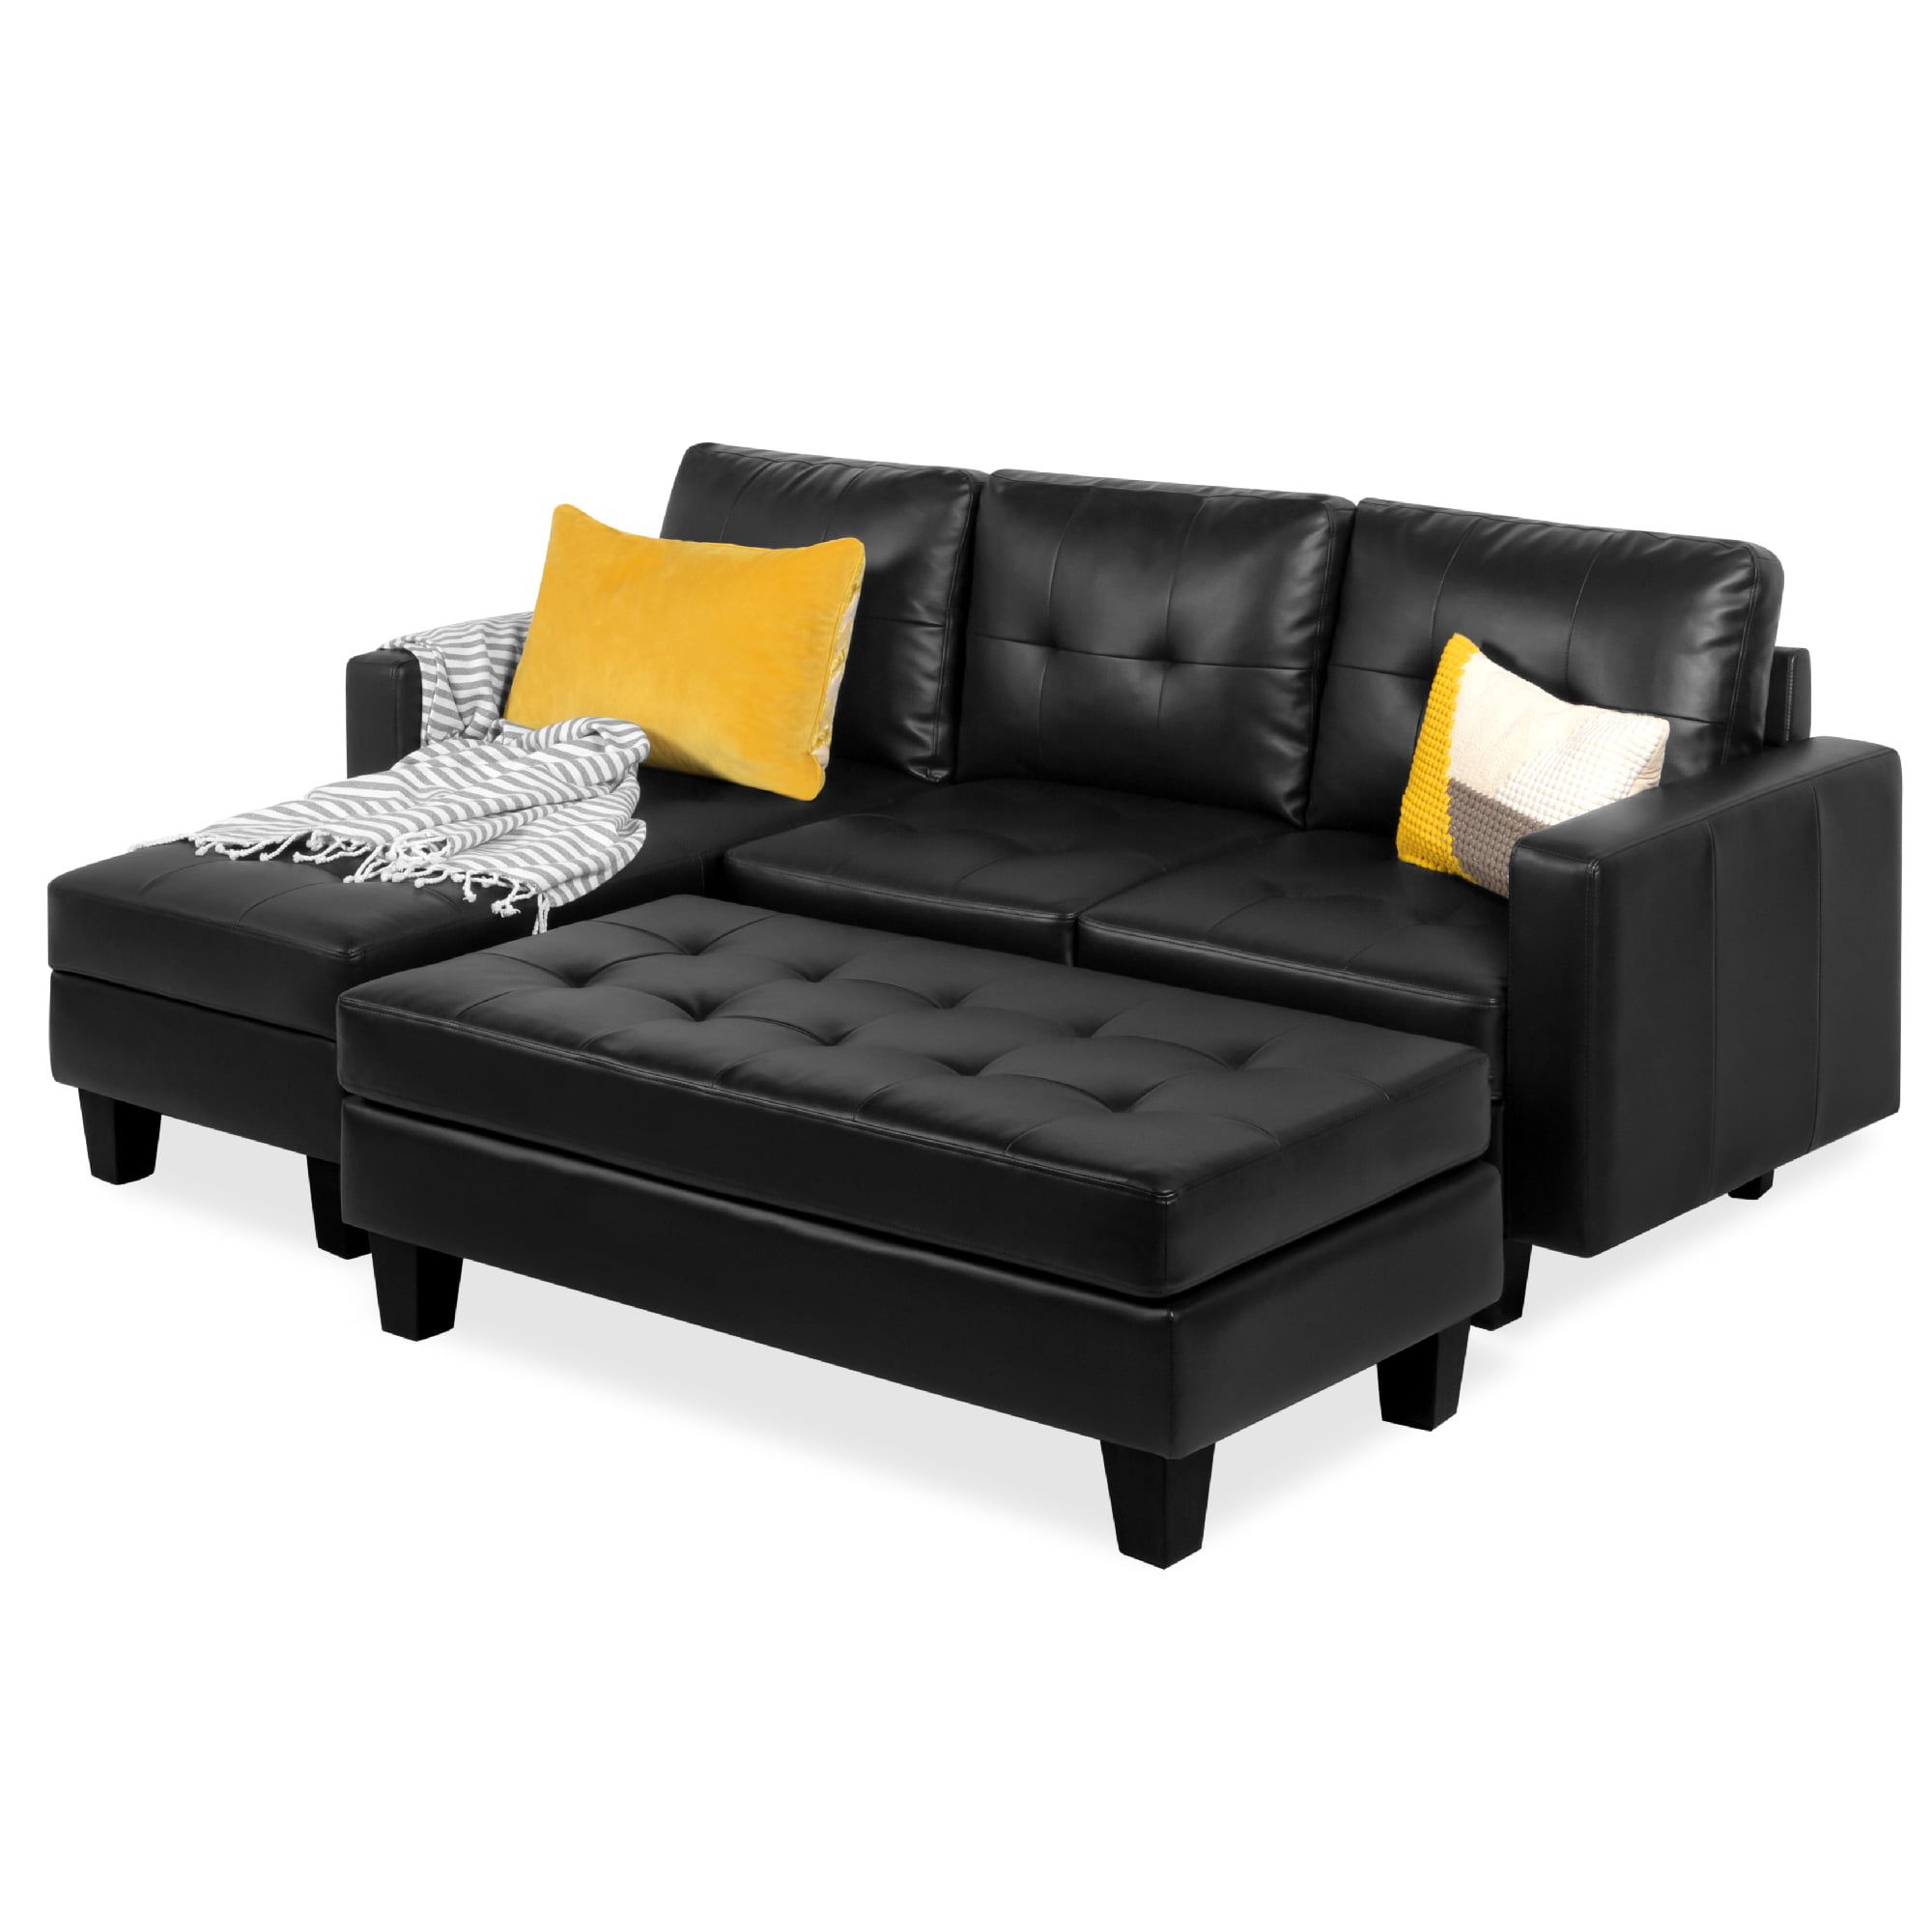 3 Seat L Shaped Sofas In Black In Preferred Best Choice Products 3 Seat L Shape Tufted Faux Leather Sectional Sofa (View 3 of 15)